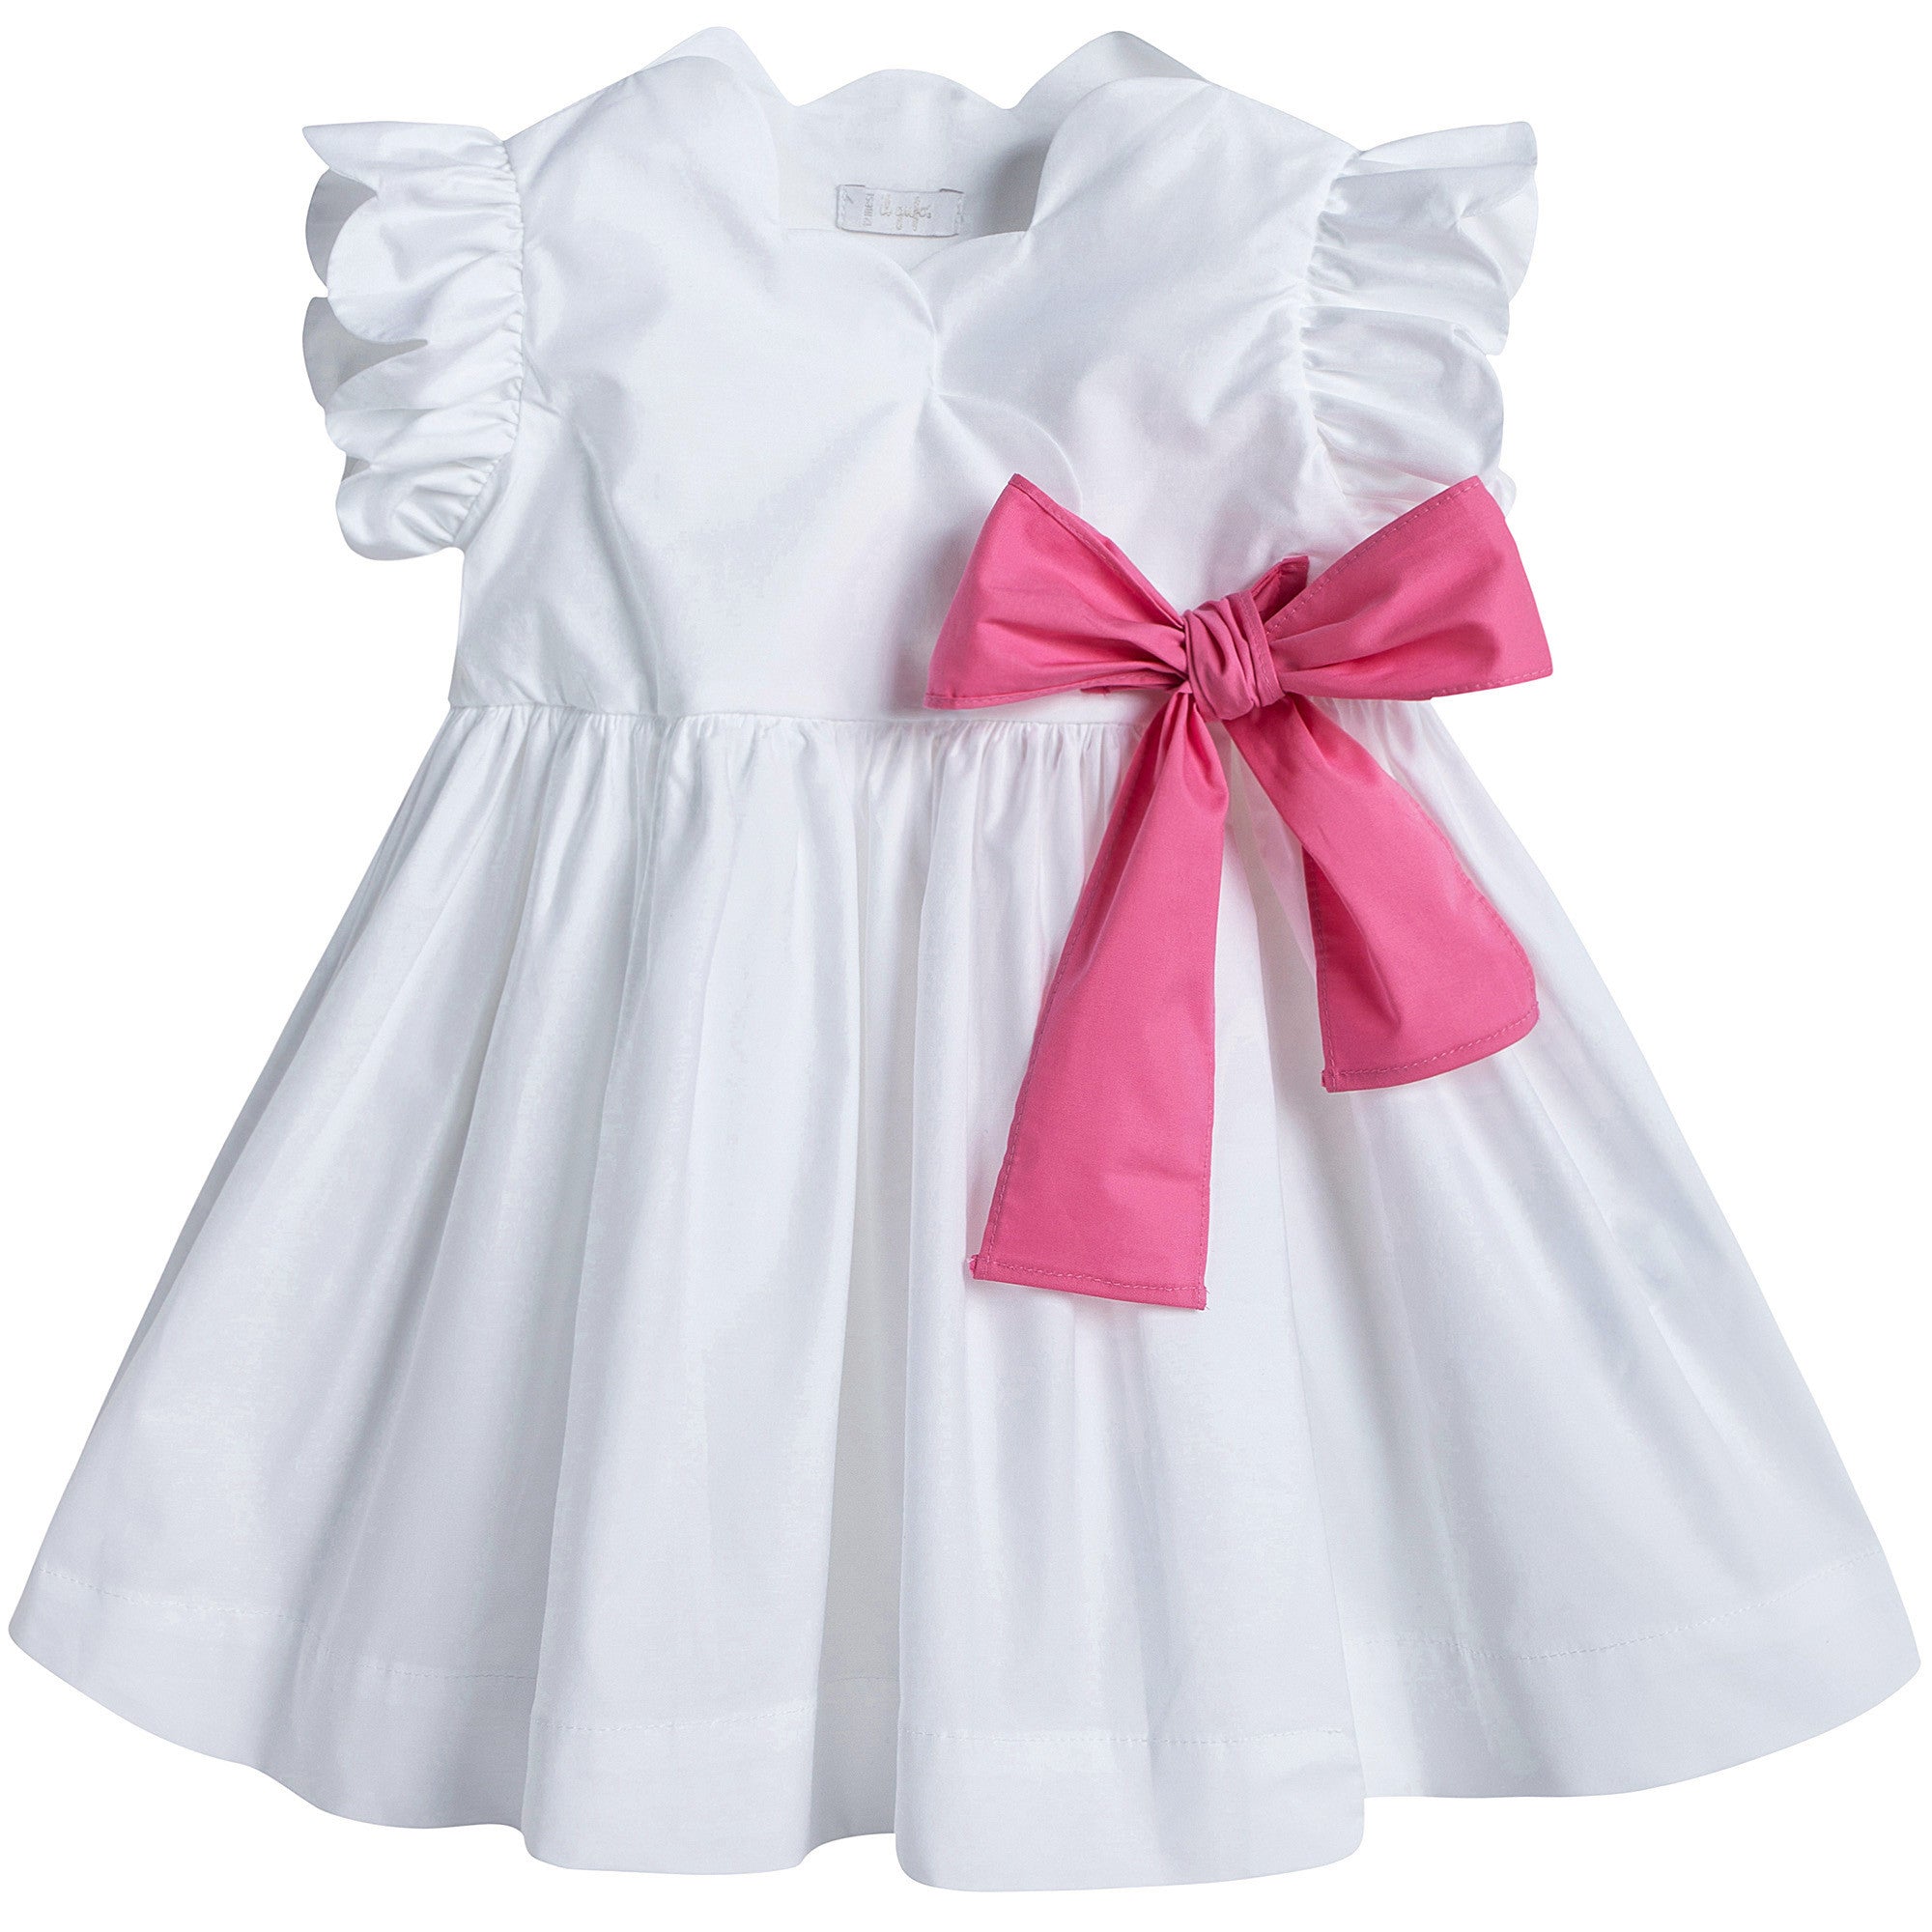 Girls White Cotton Dress with Pink Bow - CÉMAROSE | Children's Fashion Store - 1